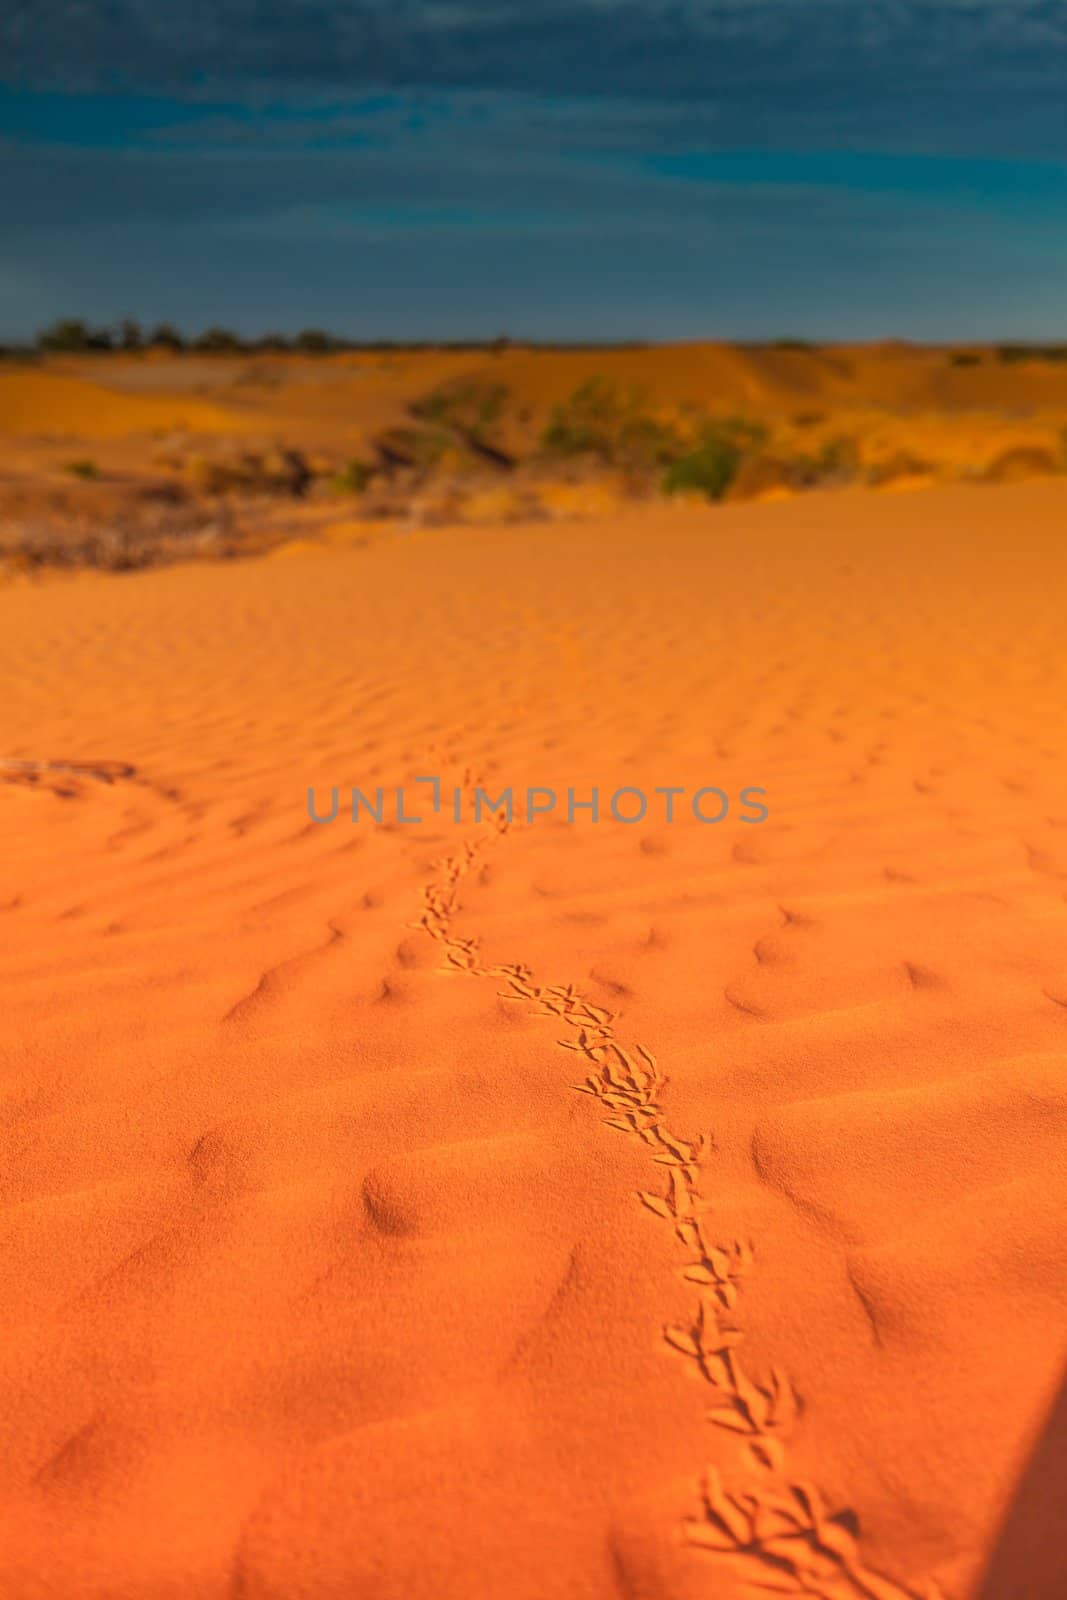 Red outback ripple sand dune desert with blue sky.